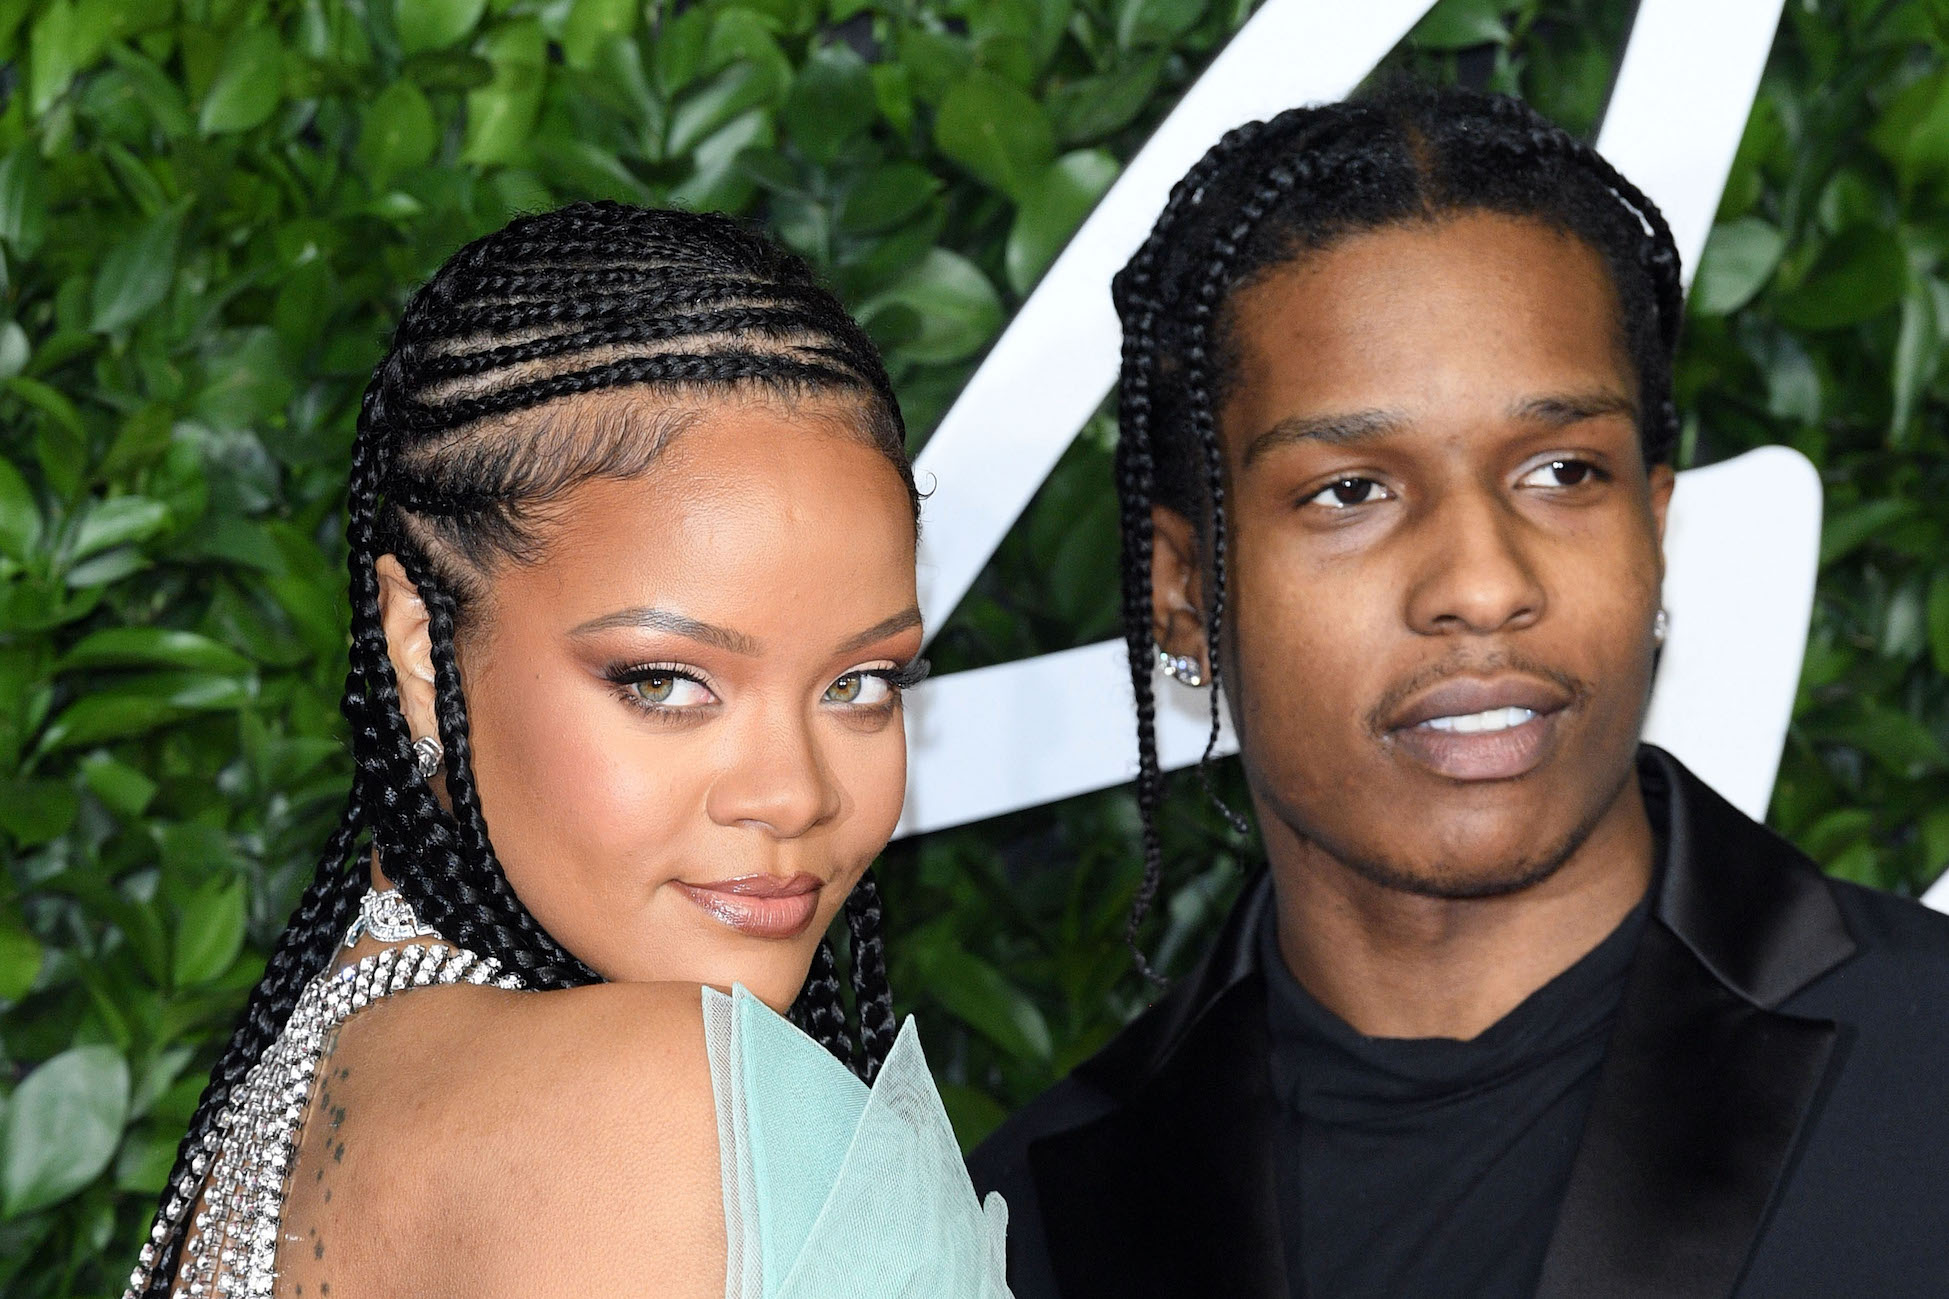 Rihanna and A$AP Rocky standing together at an event in 2019 